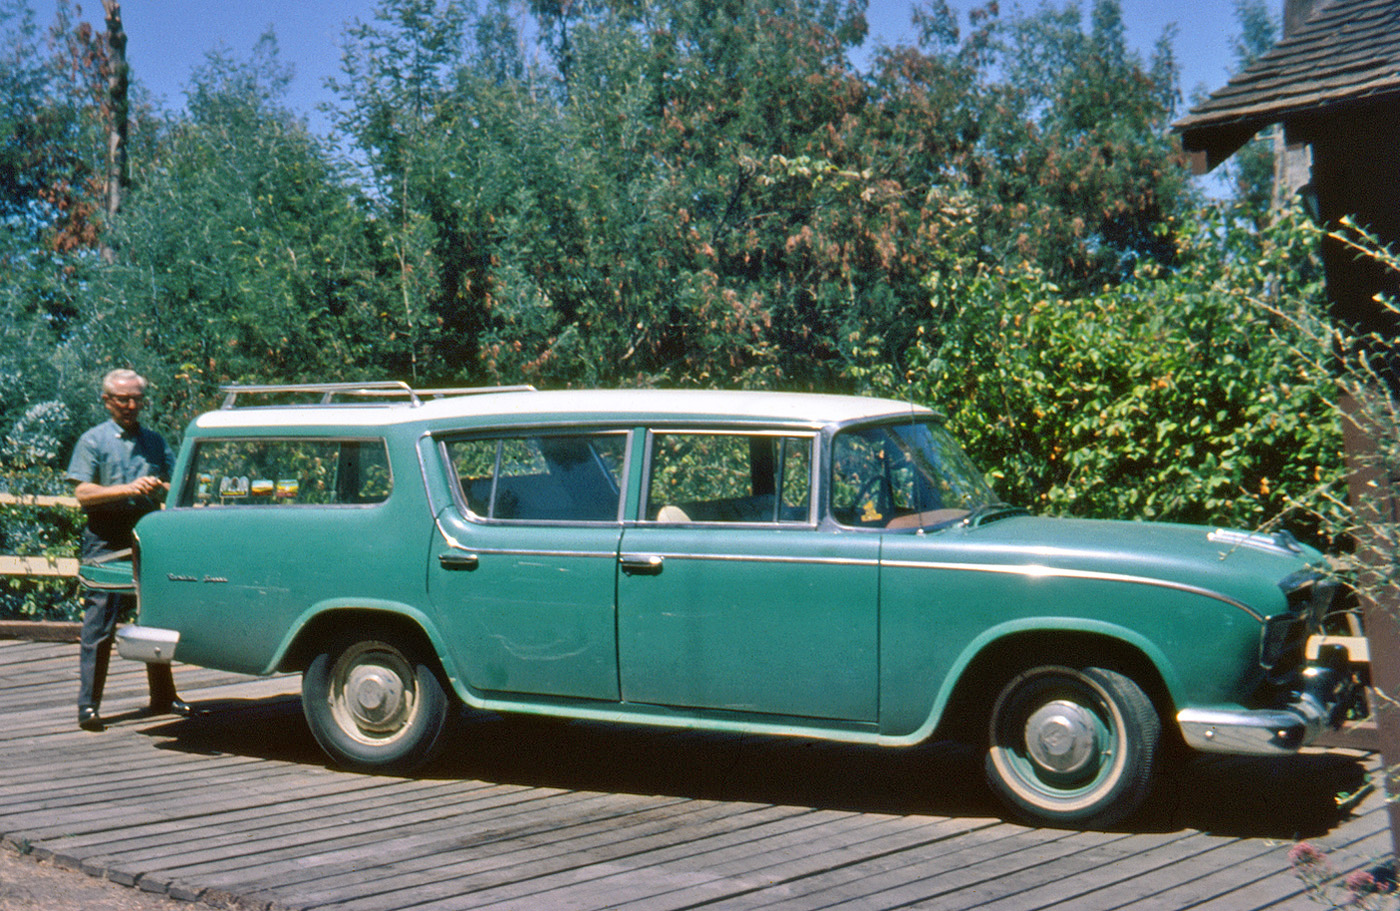 If you think this is just a photo of a well-worn old car, you're wrong. It's actually a significant moment in our family's history. June 27, 1966 was the last day for our 1956 Hudson Rambler. Previously, we saw it all shiny and sparkly, mere days after we got it. During the following ten years, it: took my sister to the church for her wedding; took us to graduations, my grade and high school and my brother's college; took us on our first visit to Yosemite, and later our very first camping trips (see our decals?); took my folks to visit their first grandchild; and perhaps most important of all, took me to my first visit to Disneyland.

I decided to record the event in a series of Ektachrome slides. Here, my father is clearing out all our personal items prior to the trip to the dealer to pick up our new car - a 1966 Rambler Classic station wagon. Oh; our trade-in allowance for this one: $50. View full size.